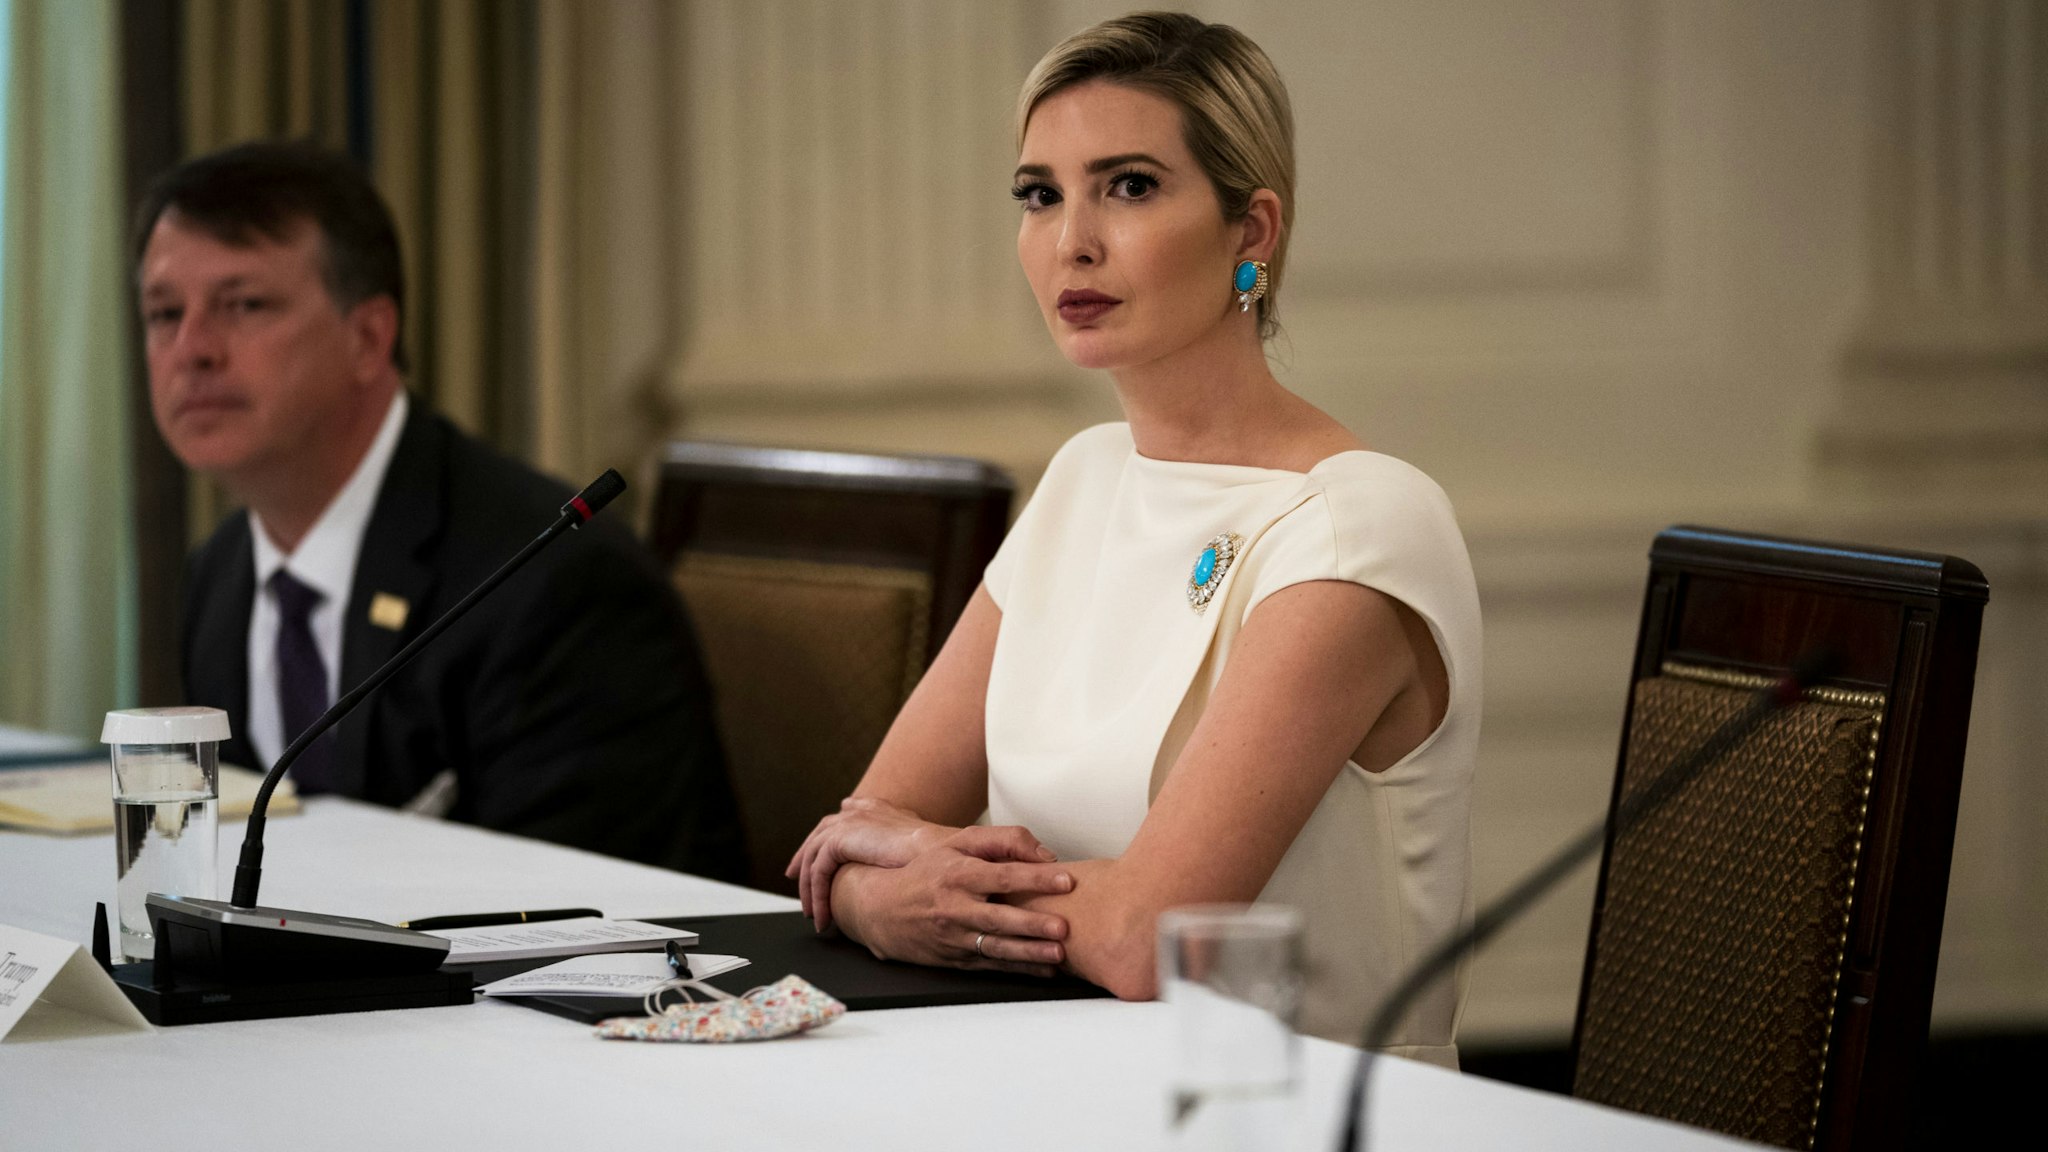 Ivanka Trump, assistant to U.S. President Donald Trump, listens during a meeting with restaurant executives in the State Dining Room of the White House in Washington, D.C., U.S., on Monday, May 18, 2020. Trump said he is currently taking hydroxychloroquine, the anti-malaria drug he has promoted as a treatment to combat coronavirus infection. Photographer: Doug Mills/The New York Times/Bloomberg via Getty Images